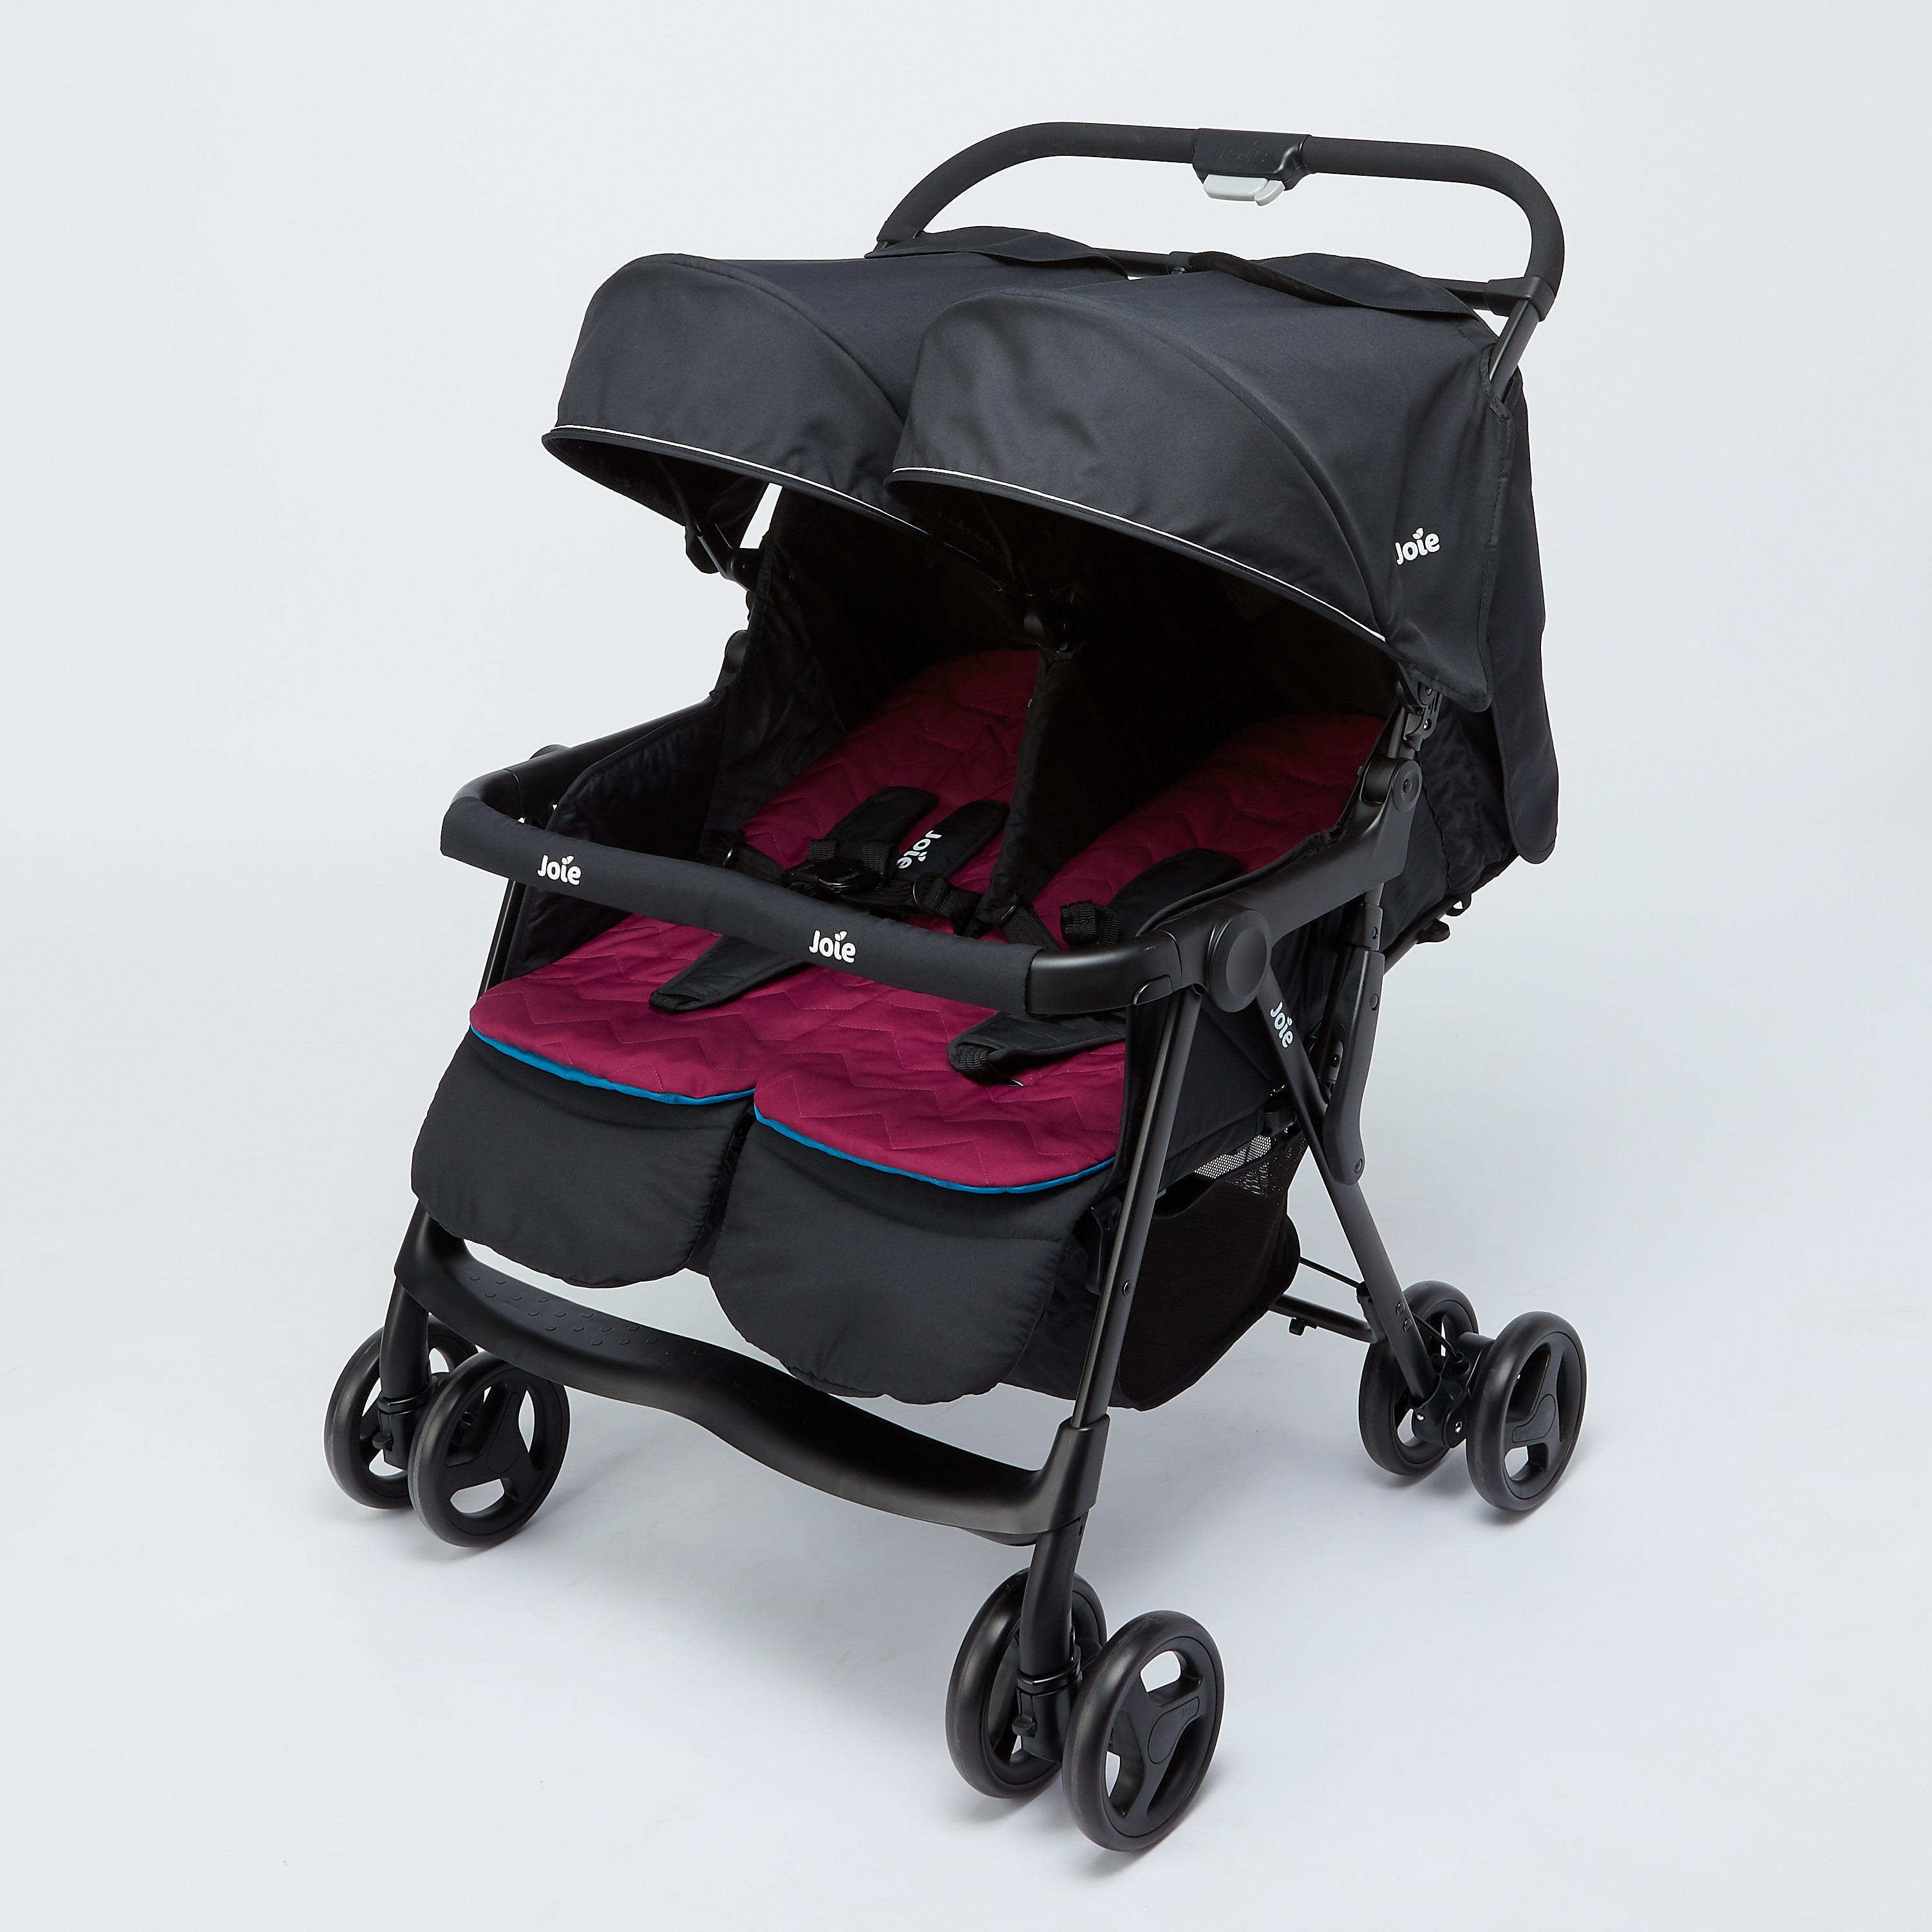 Rain Cover And More! Twin Double Buggy Baby Pushchair Pram With Changing Bag 